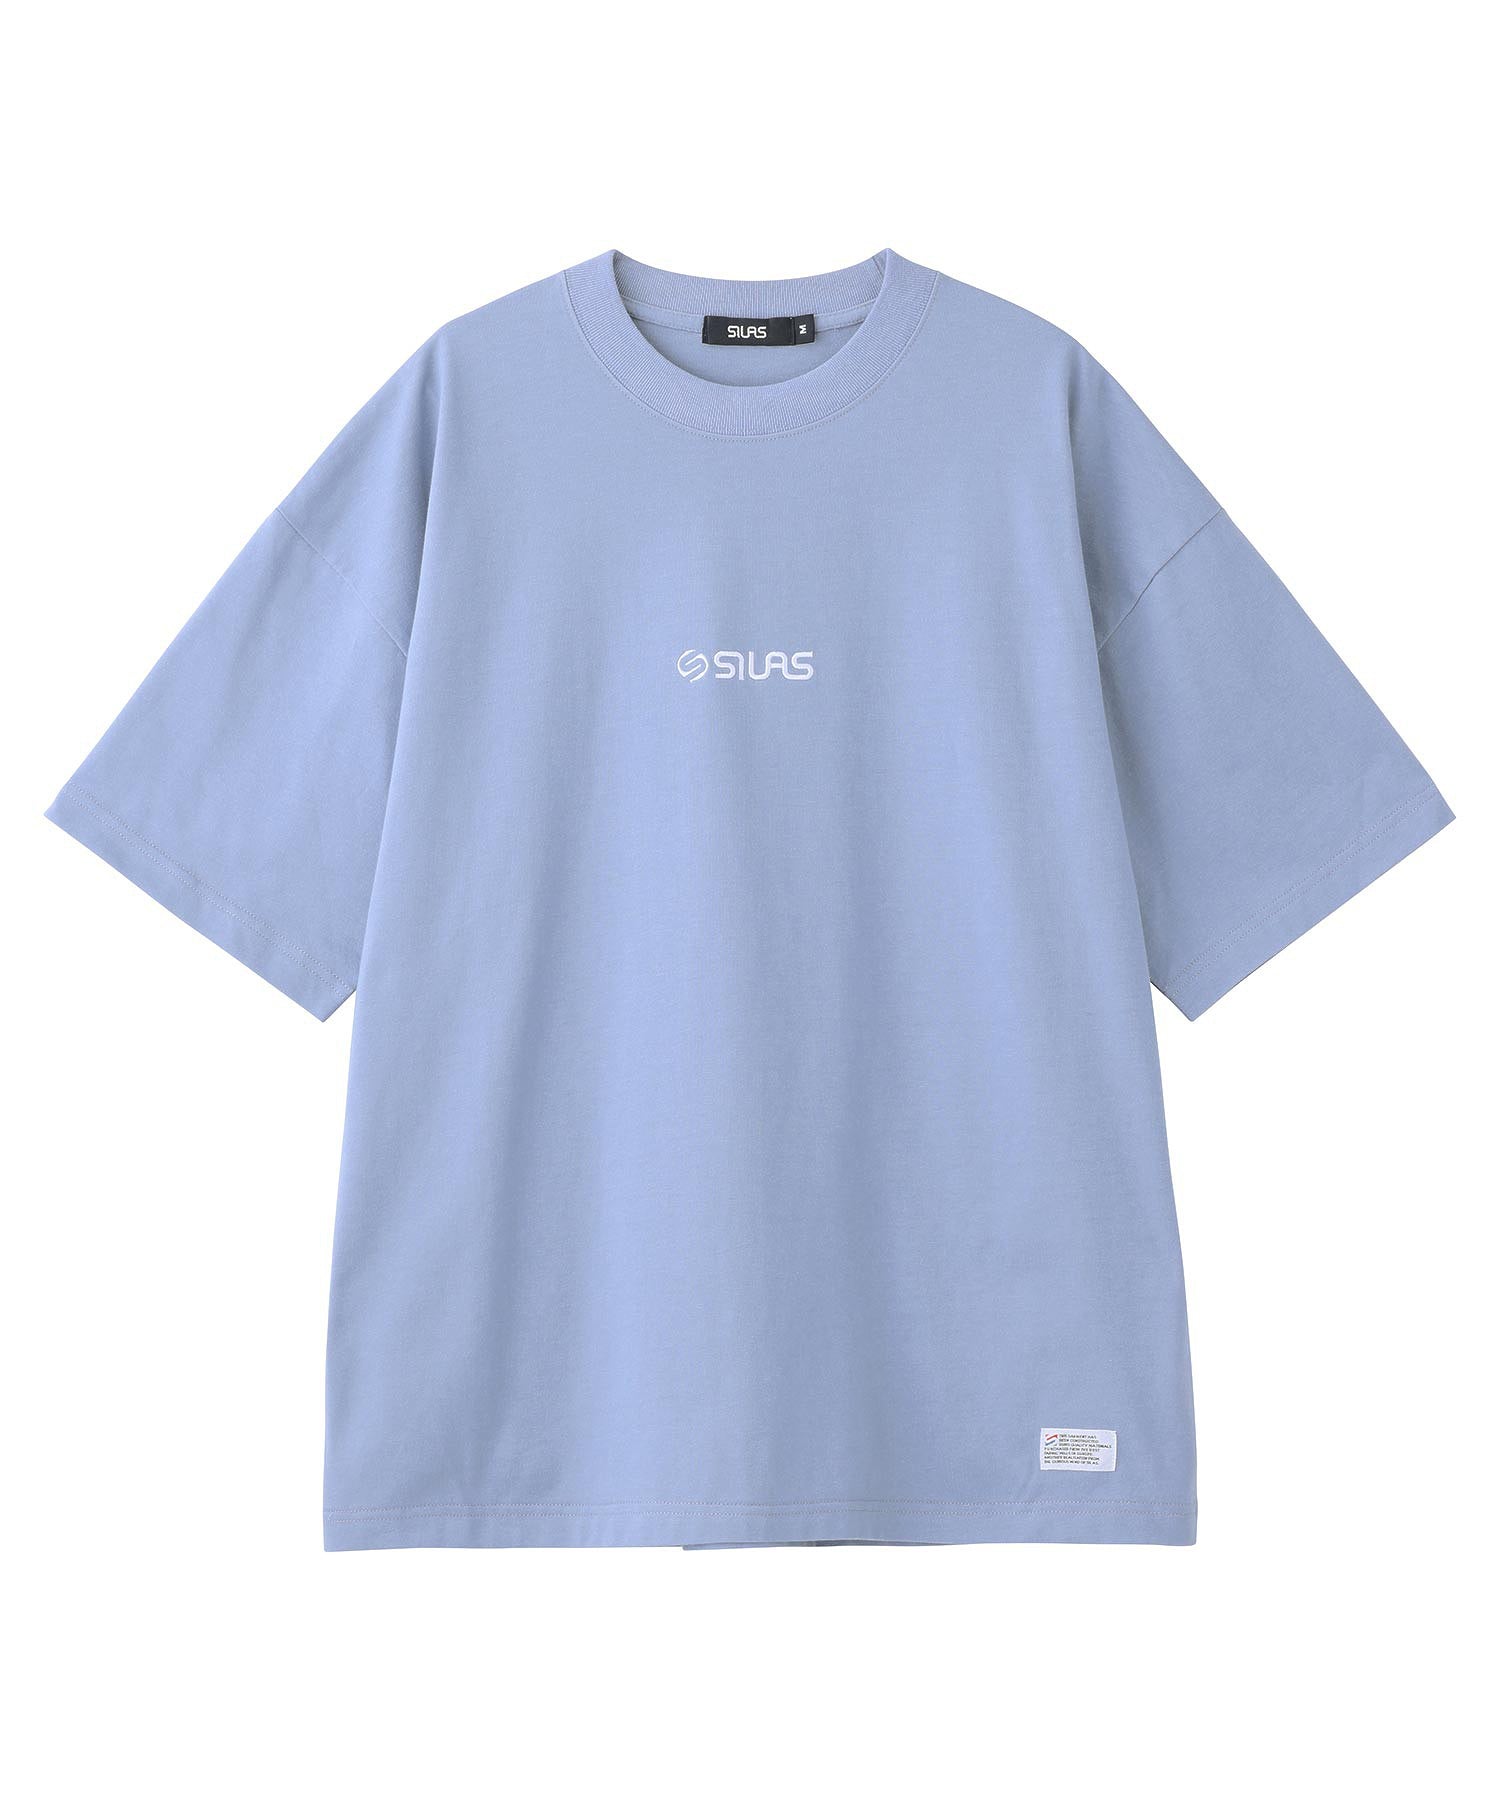 OLD LOGO EMBROIDERY WIDE S/S TEE SILAS